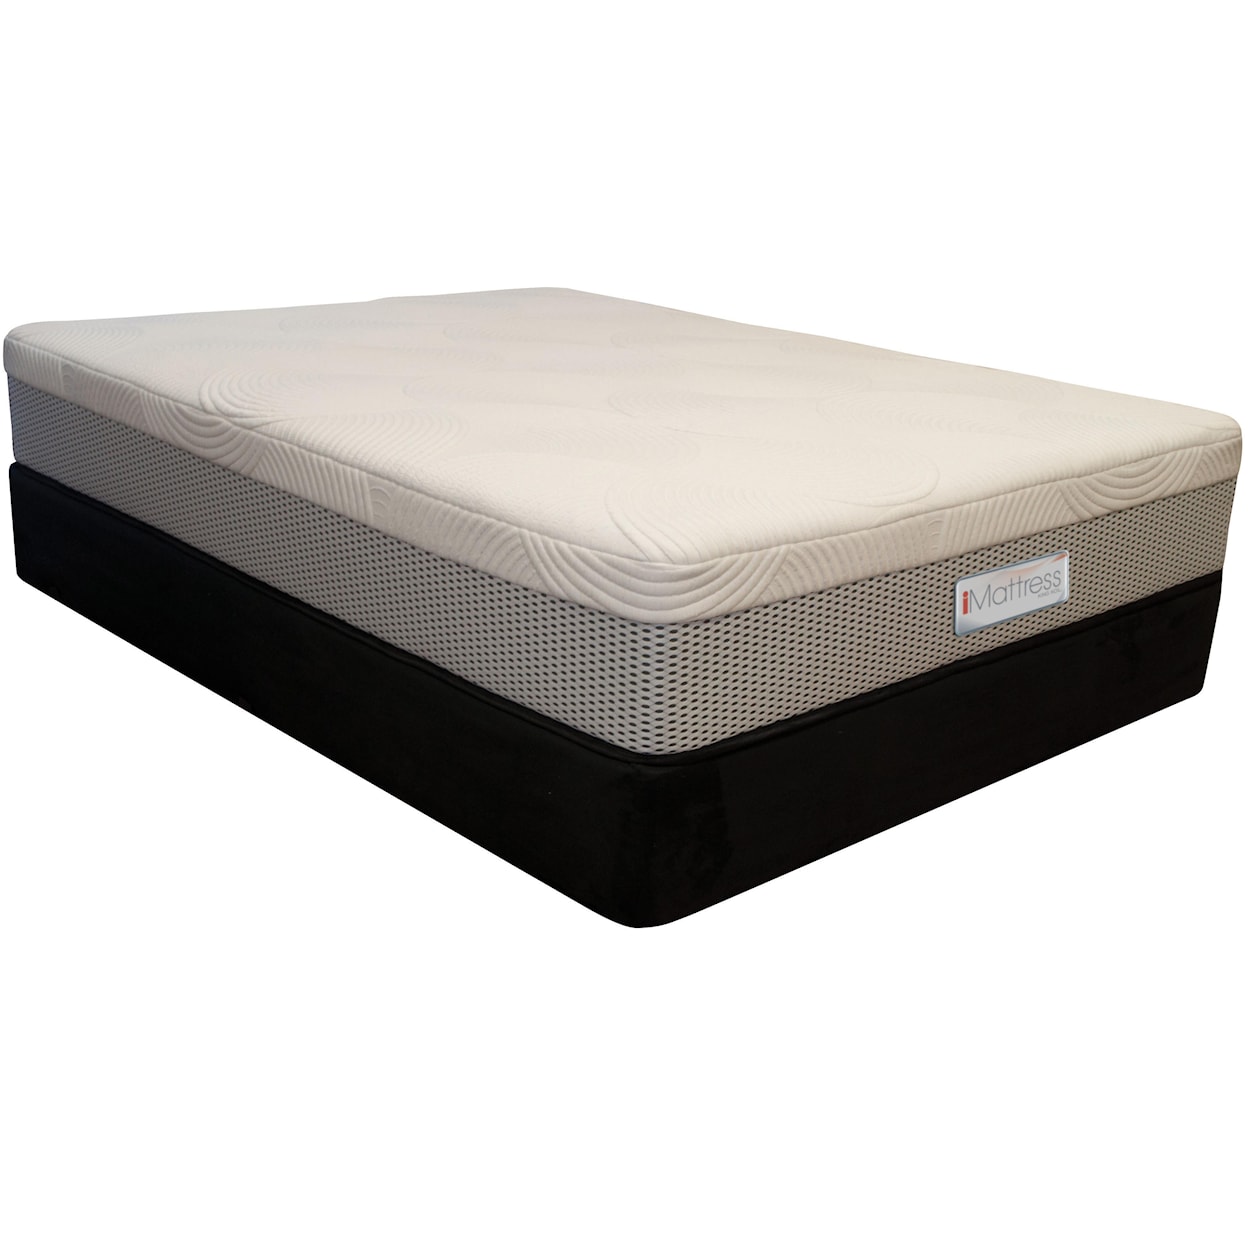 King Koil XS1-14 King Pocketed Coil Mattress